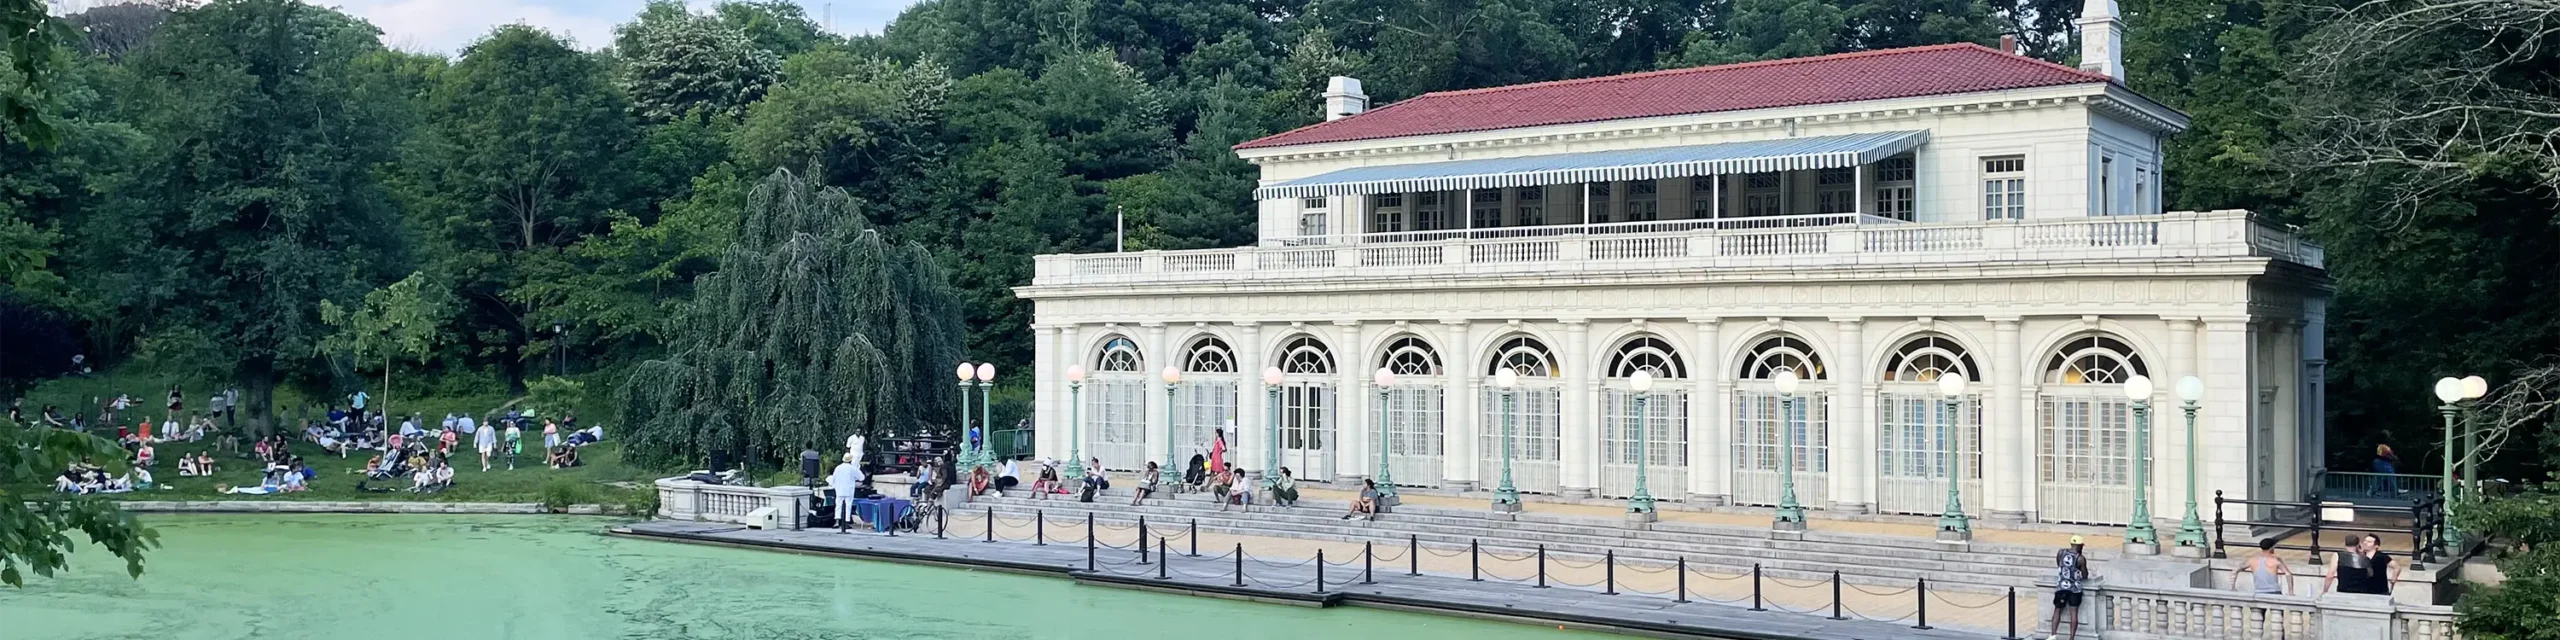 Boathouse and lake at Prospect Park